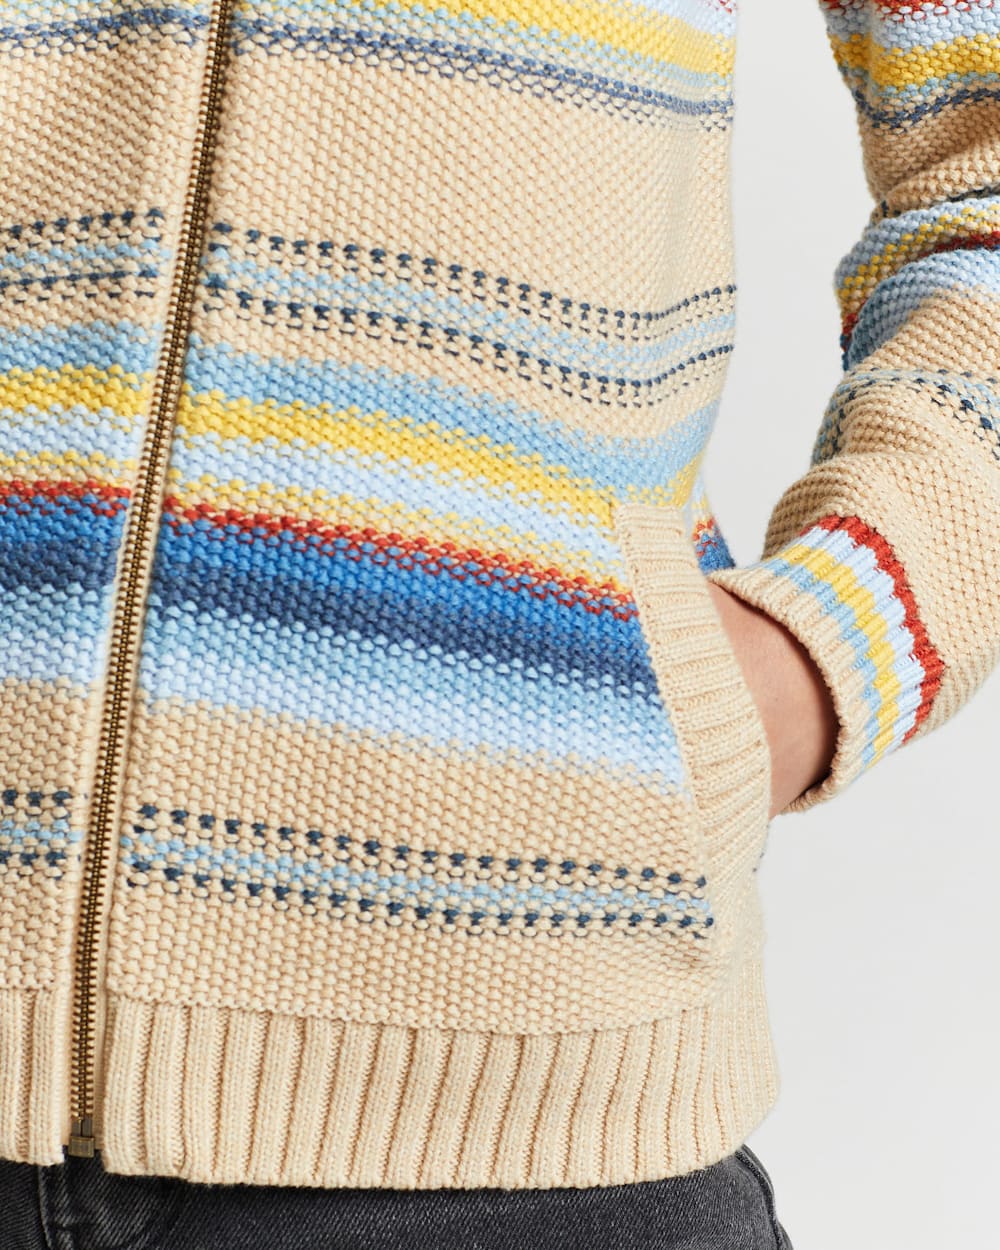 ALTERNATE VIEW OF WOMEN'S STRIPED CAMP SWEATER IN WARM SAND MULTI image number 4